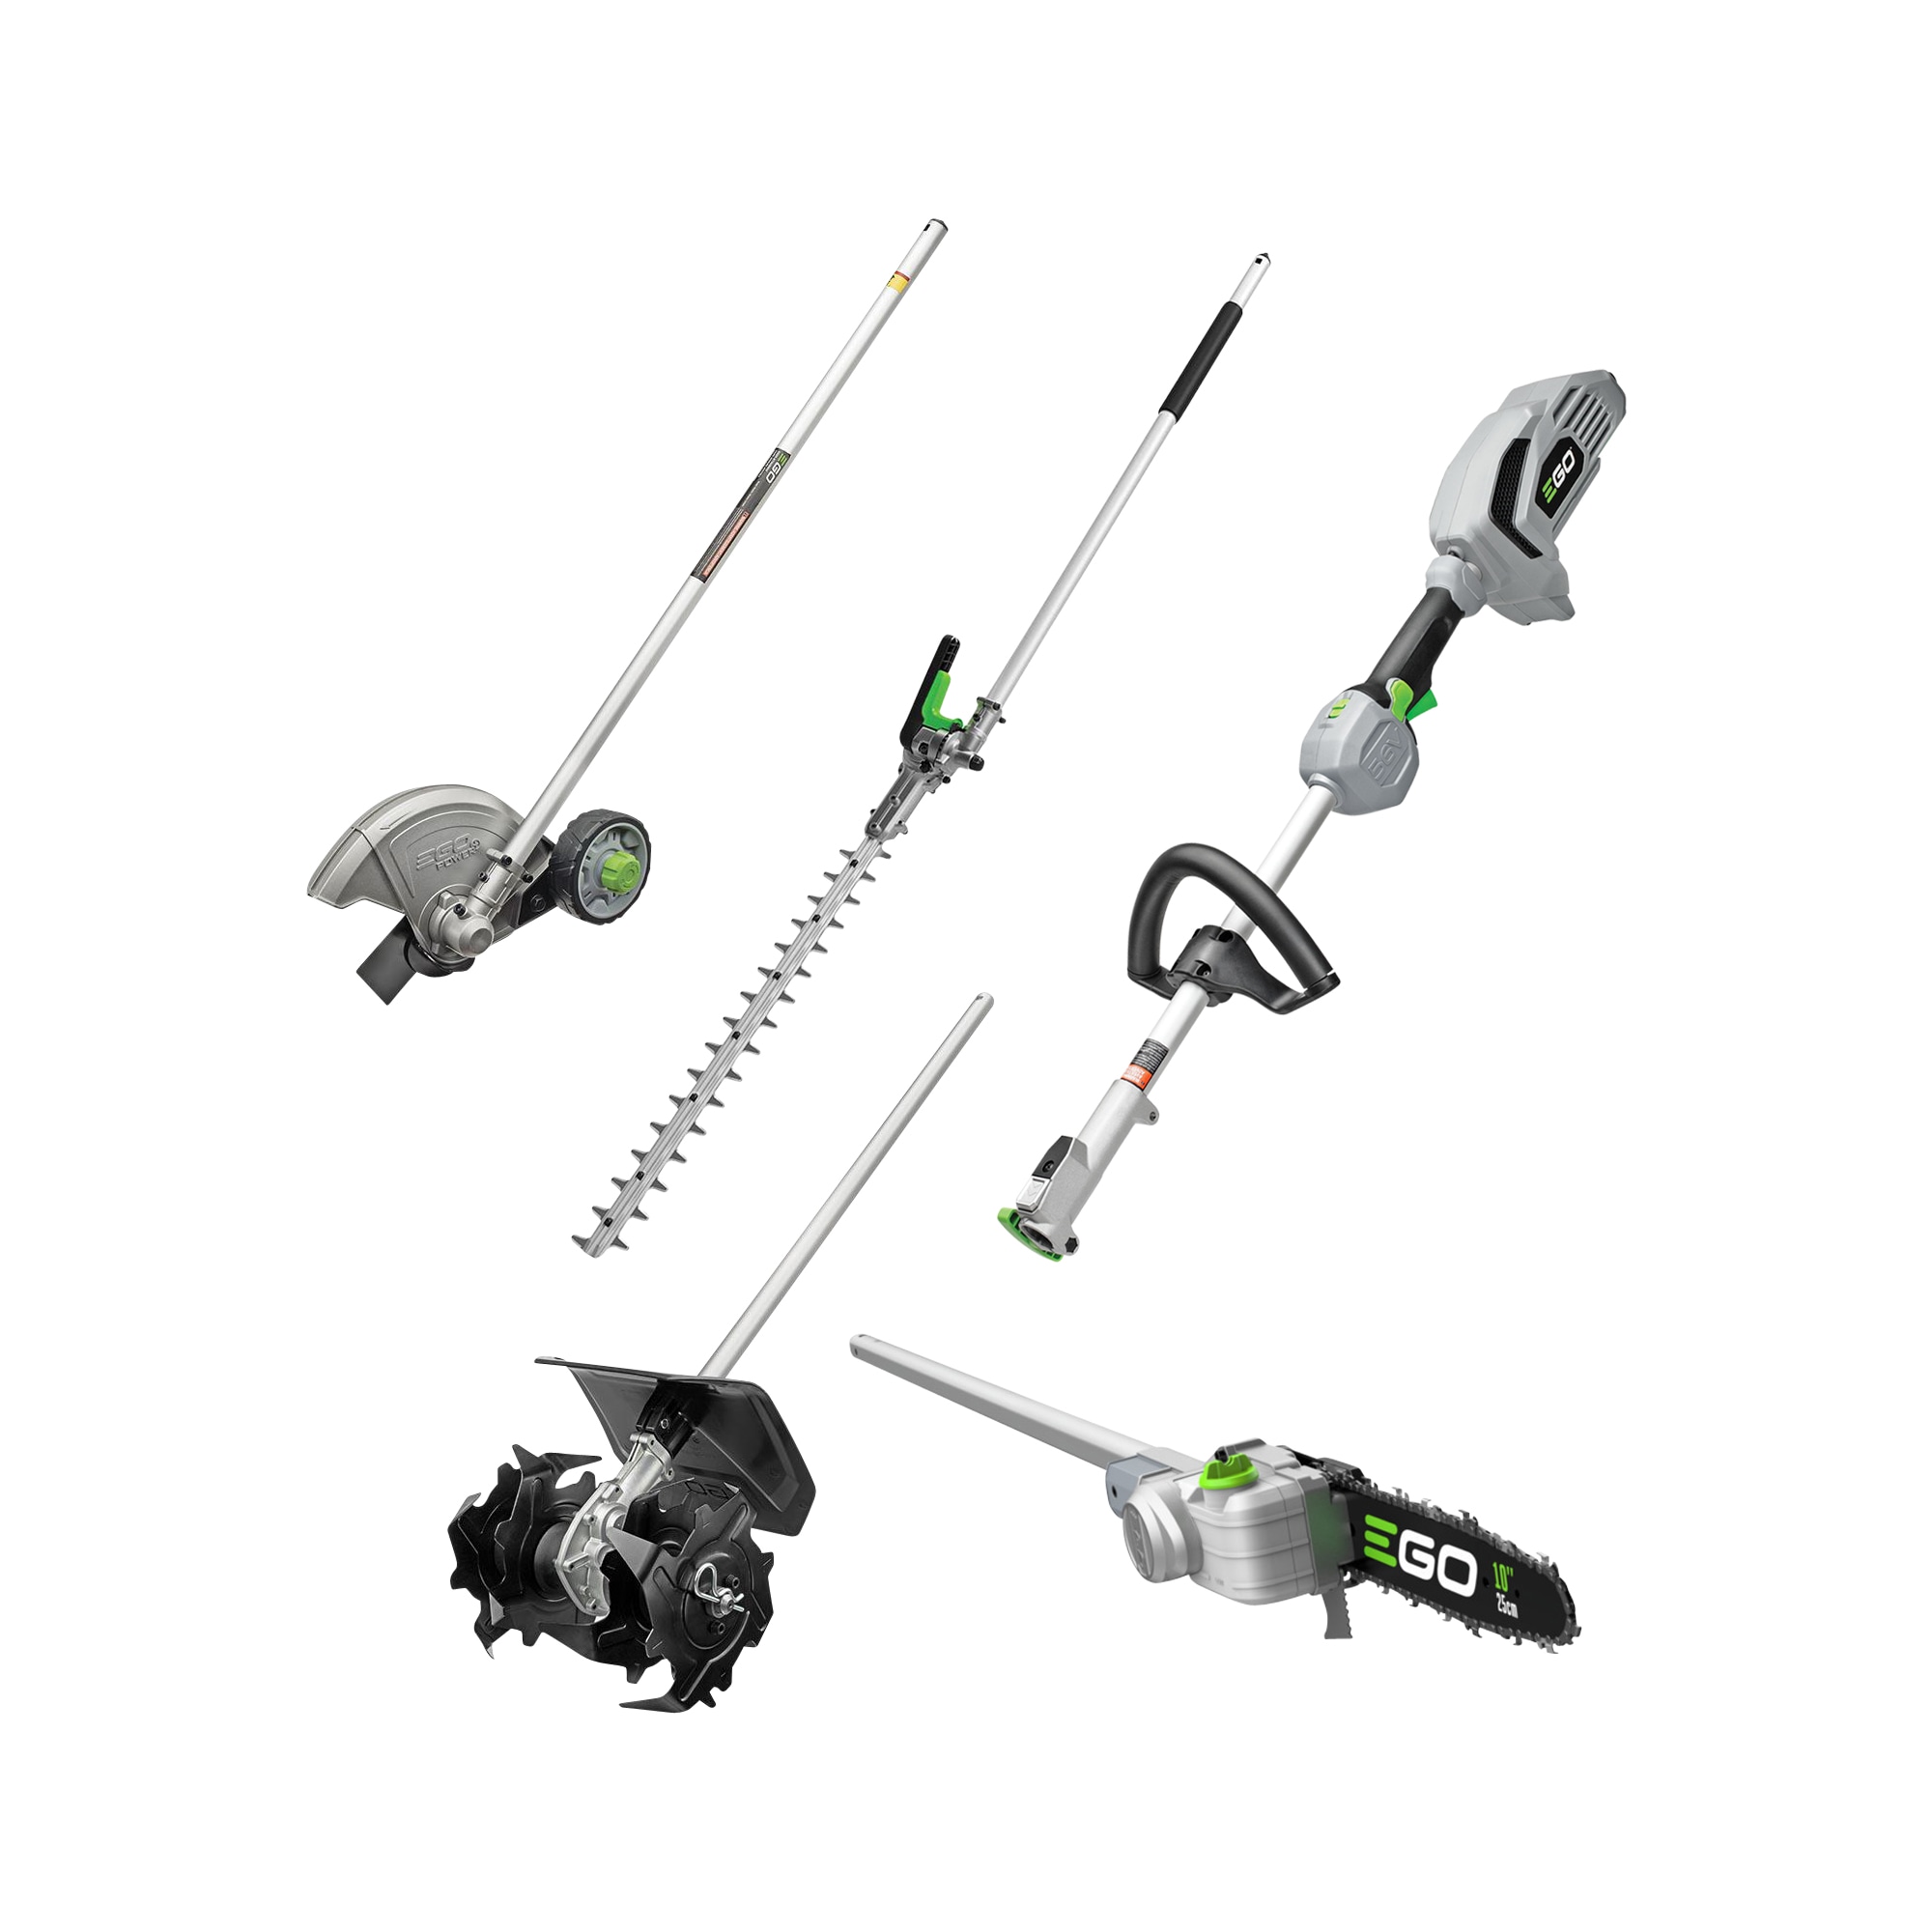 EGO EGO POWER+ Trimmer, Edger and Pole Saw Multi-Head System Attachment Kit